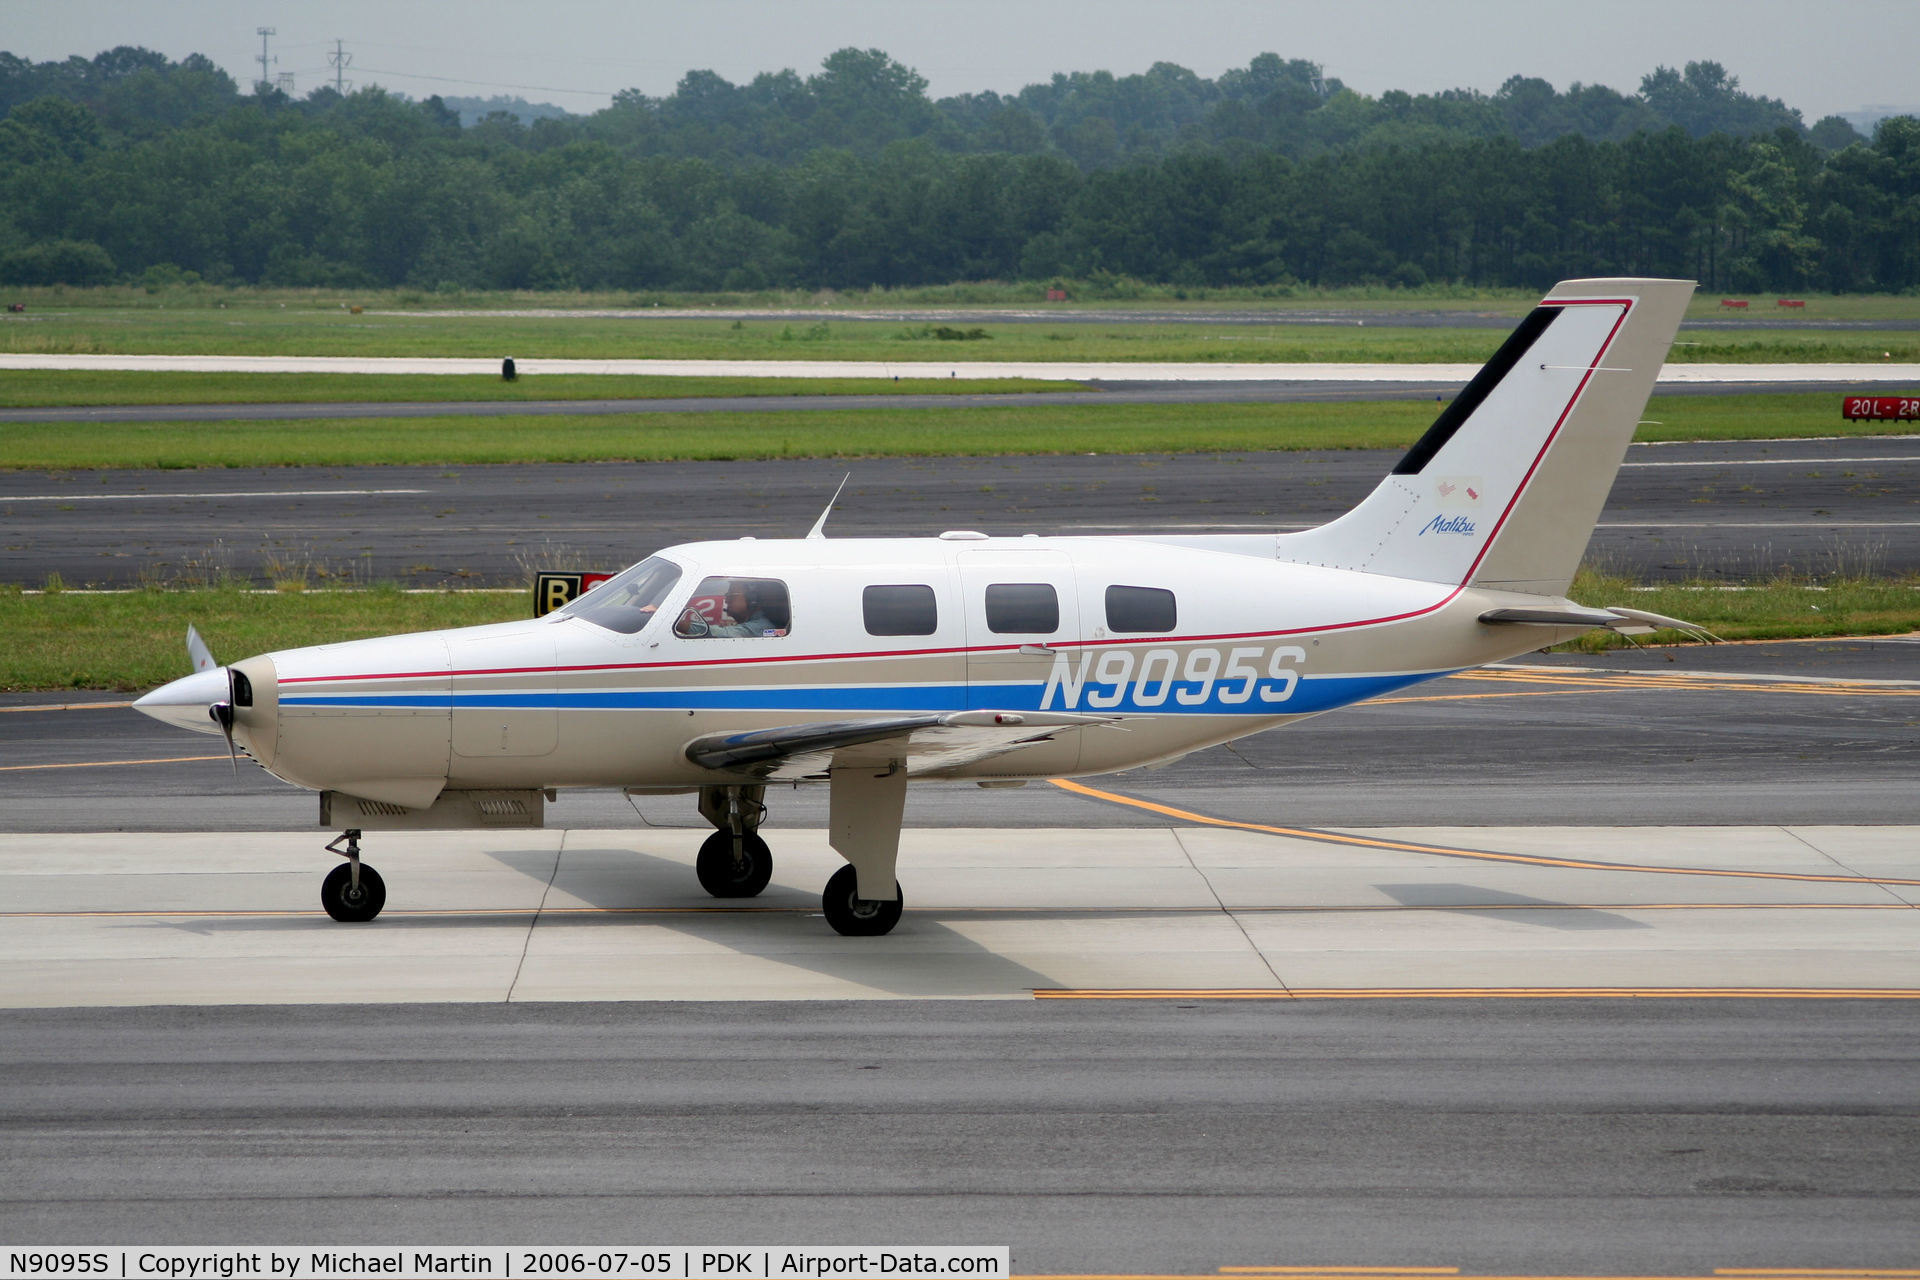 N9095S, 1986 Piper PA-46-310P Malibu C/N 46-8608061, Taxing to Epps Air Service